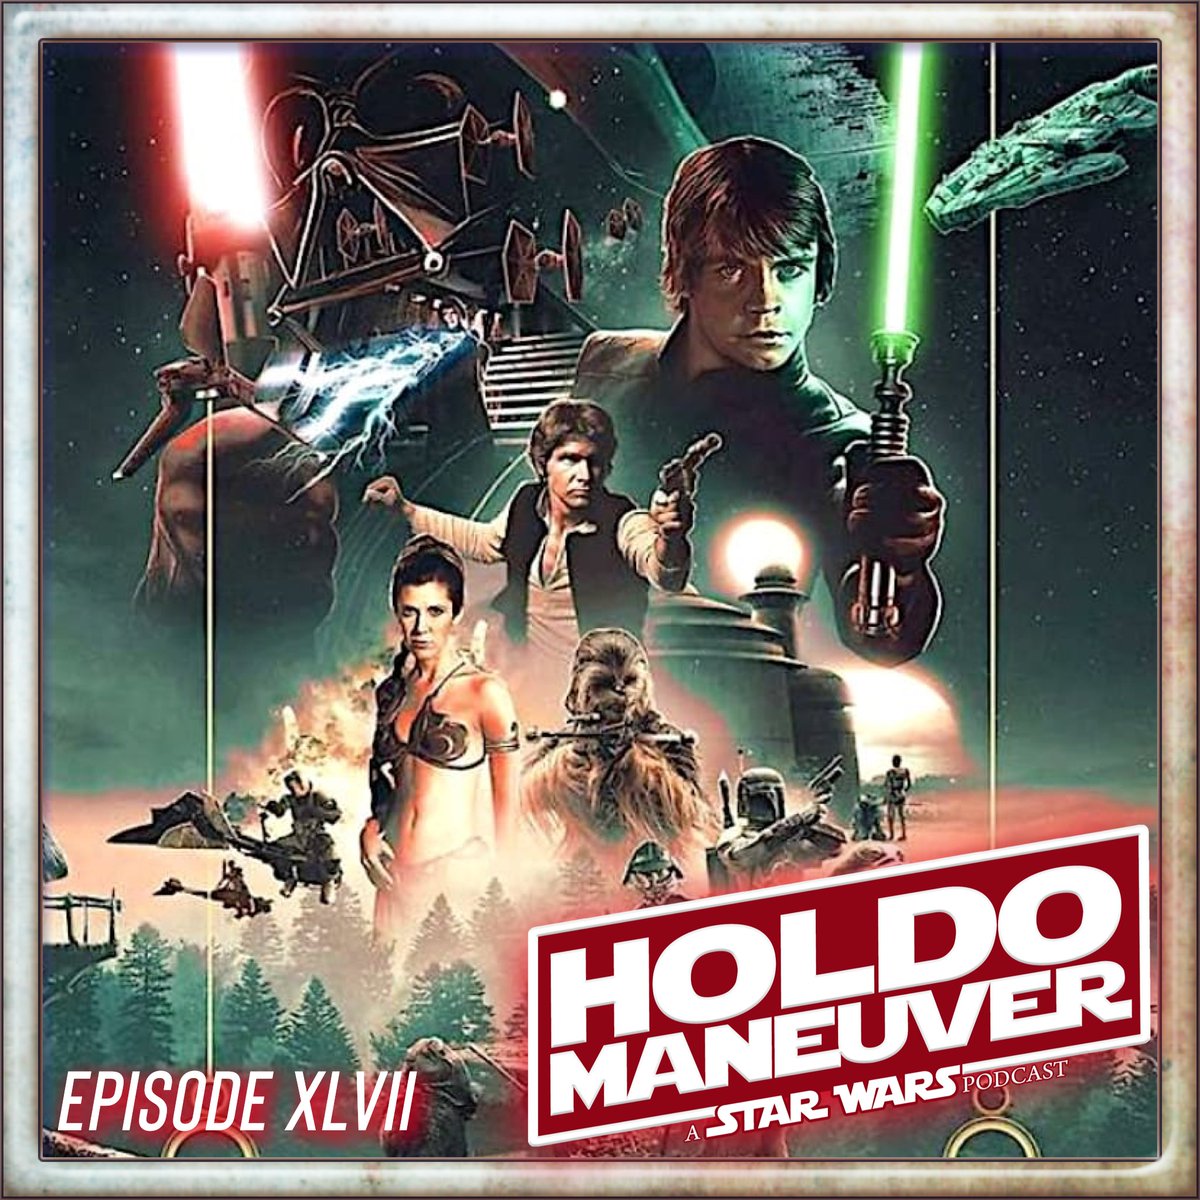 🔊Listen to the audio version here and leave a ⭐️⭐️⭐️⭐️⭐️review!  

#ReturnoftheJedi 

podcasters.spotify.com/pod/show/holdo…